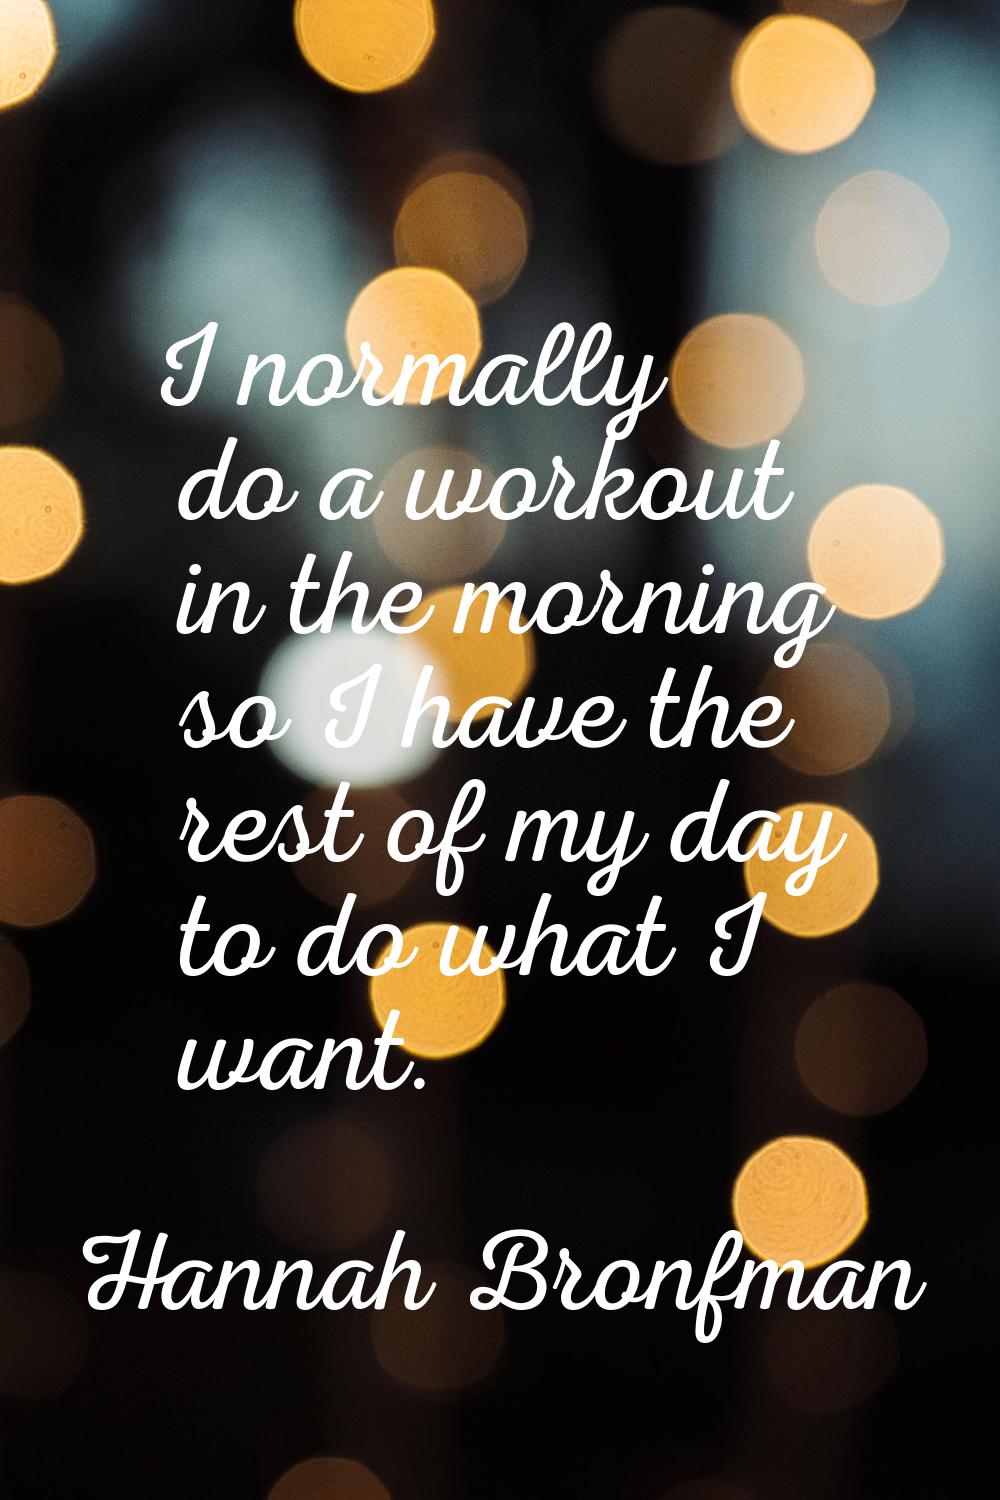 I normally do a workout in the morning so I have the rest of my day to do what I want.